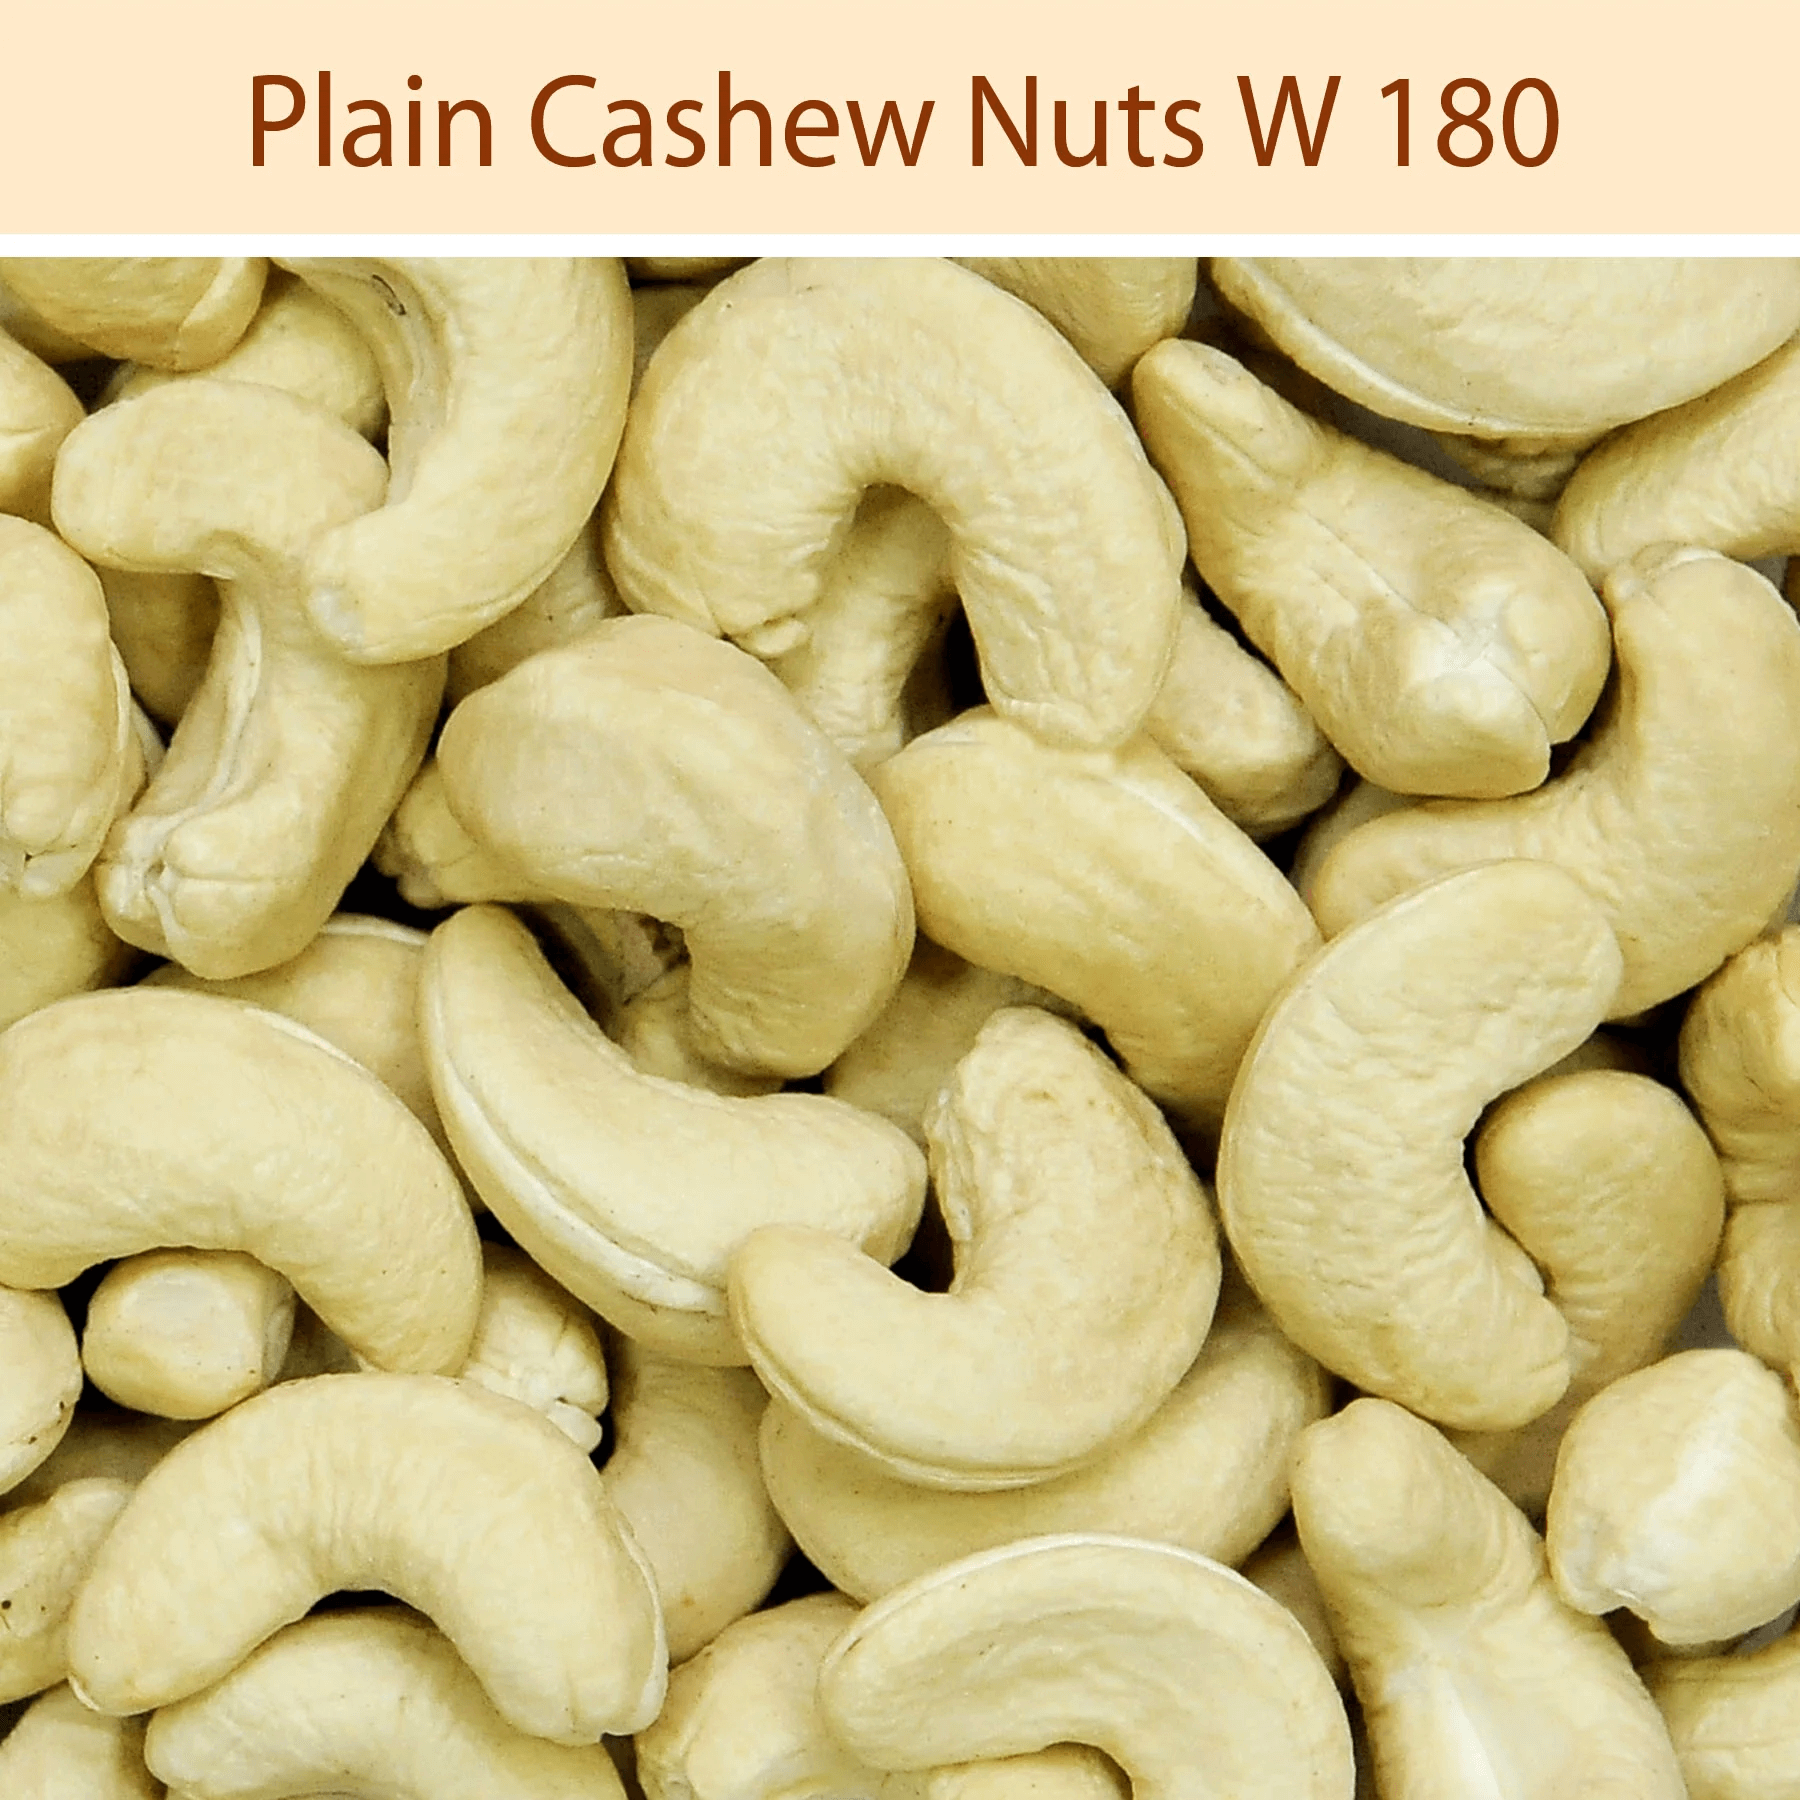 Cashew w180 and its speciality | Dry Fruits Home